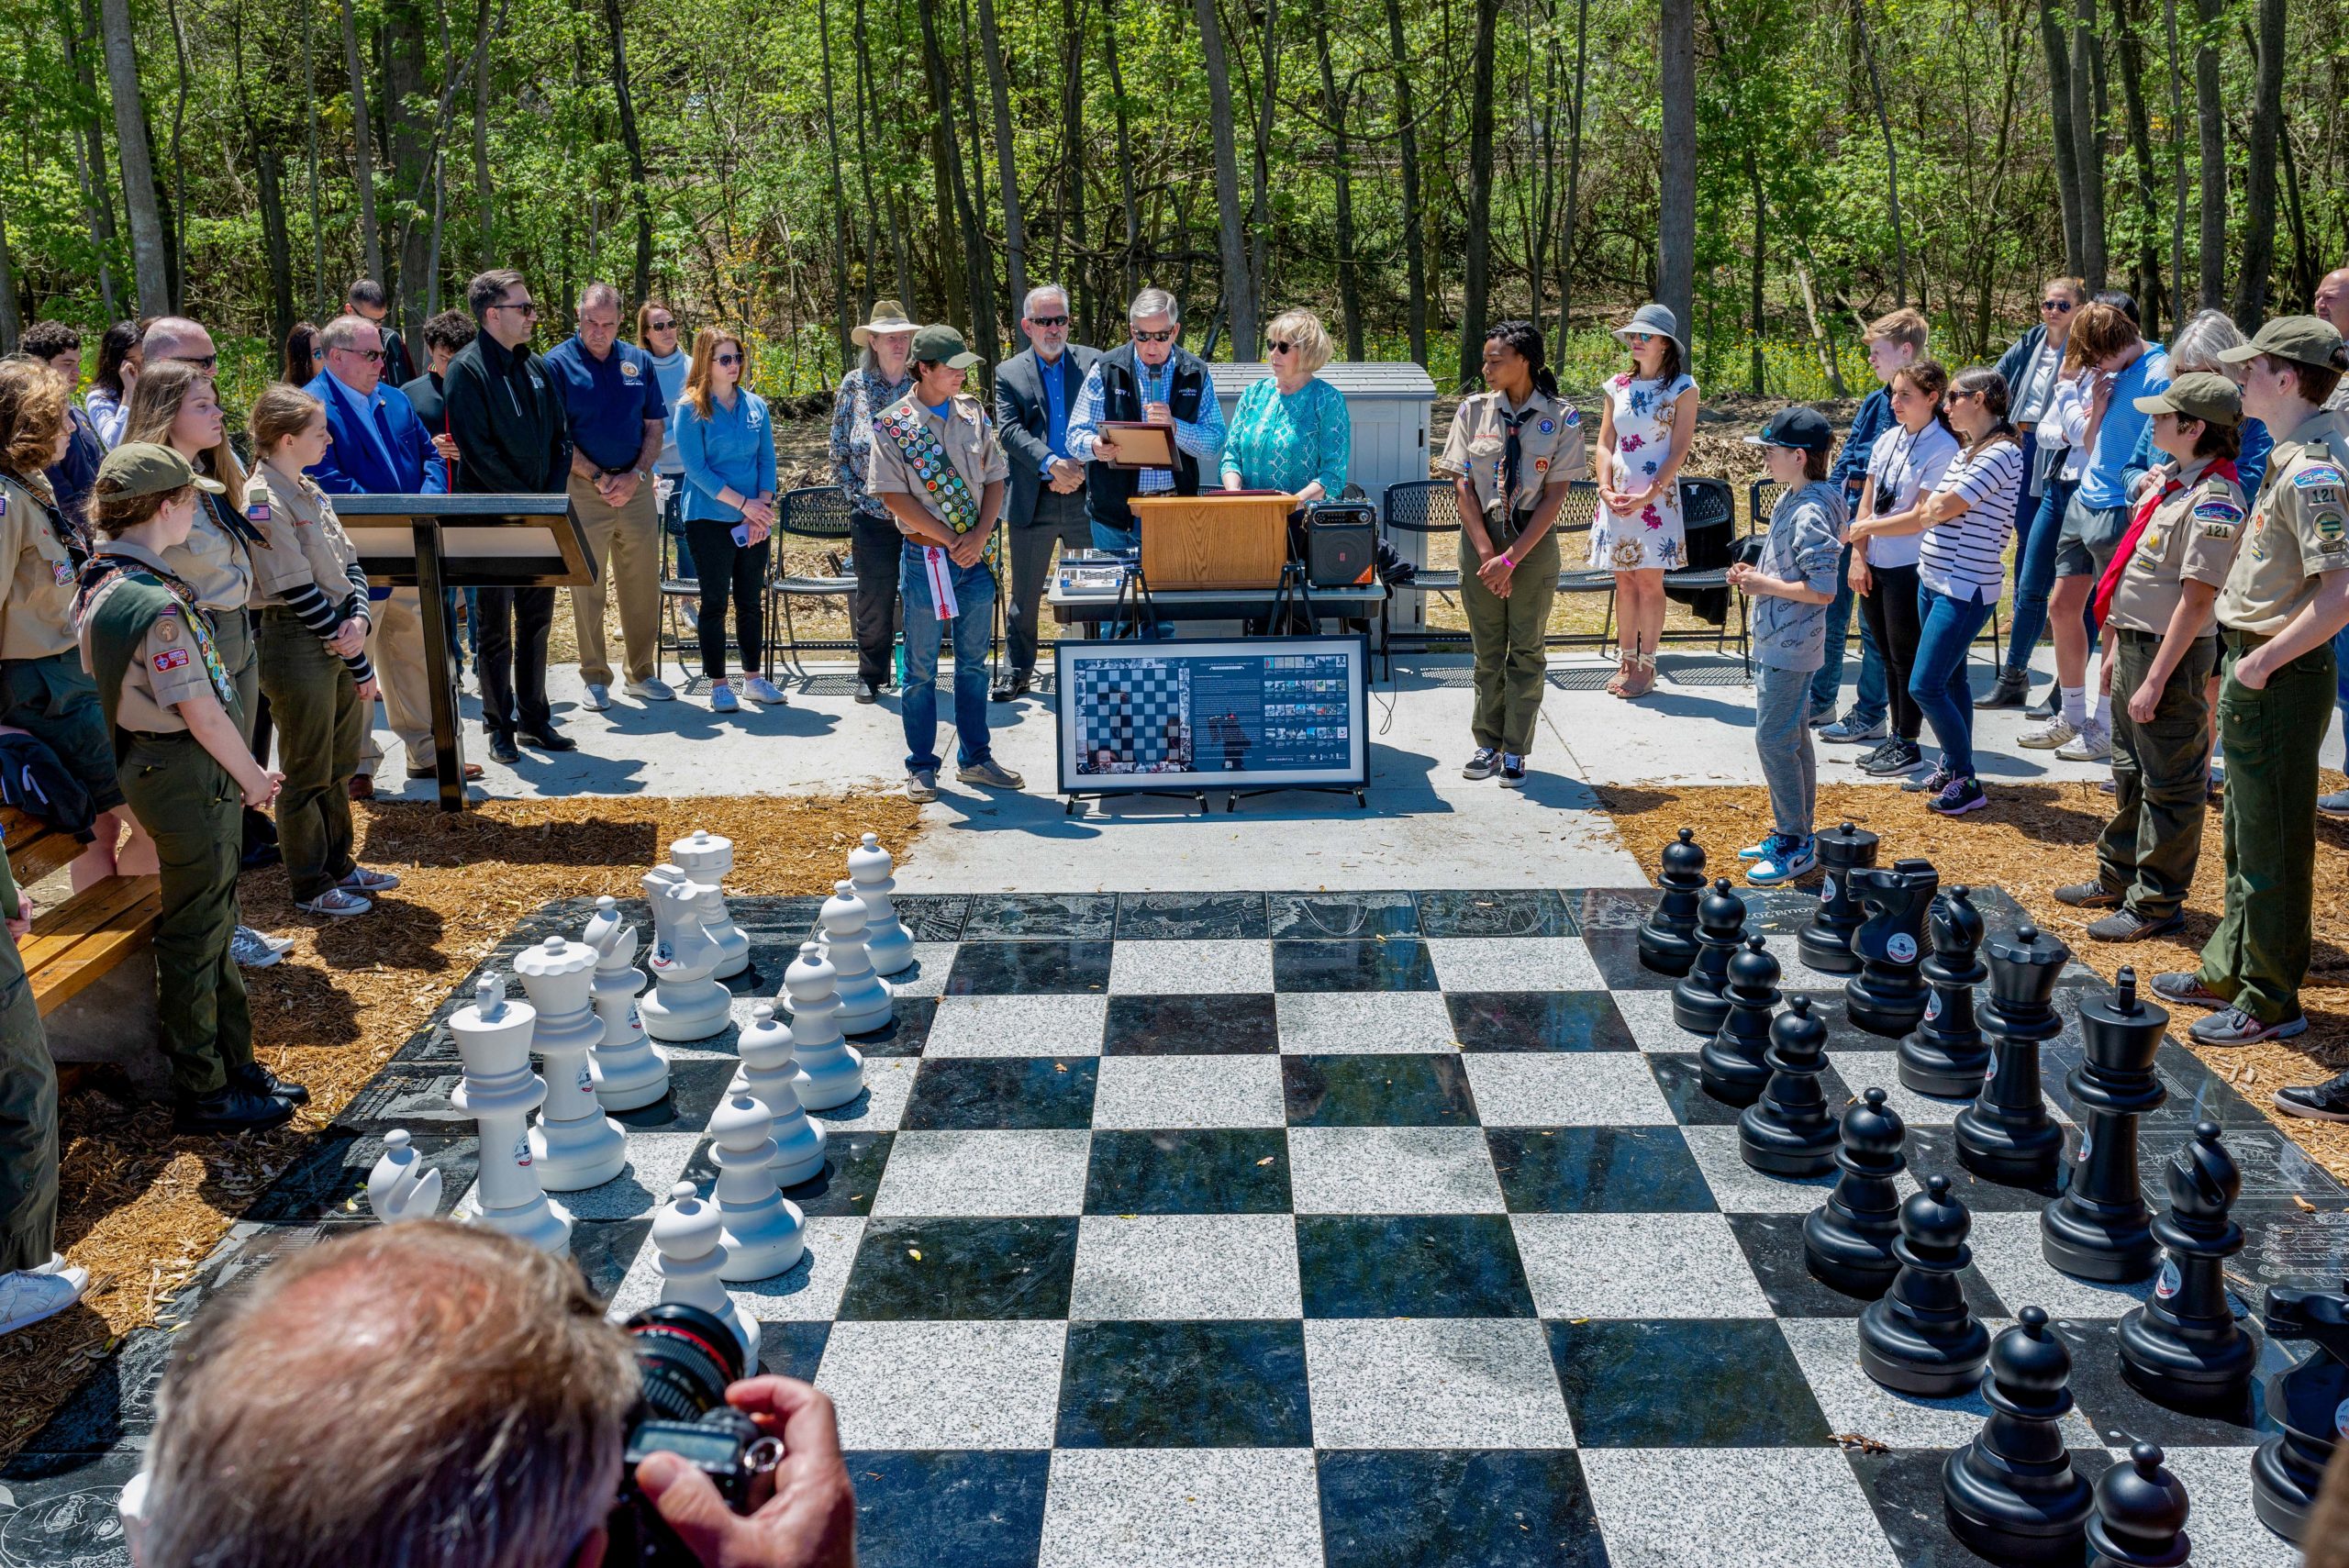 Checkmate! Eagle Scout’s chess project a win with community